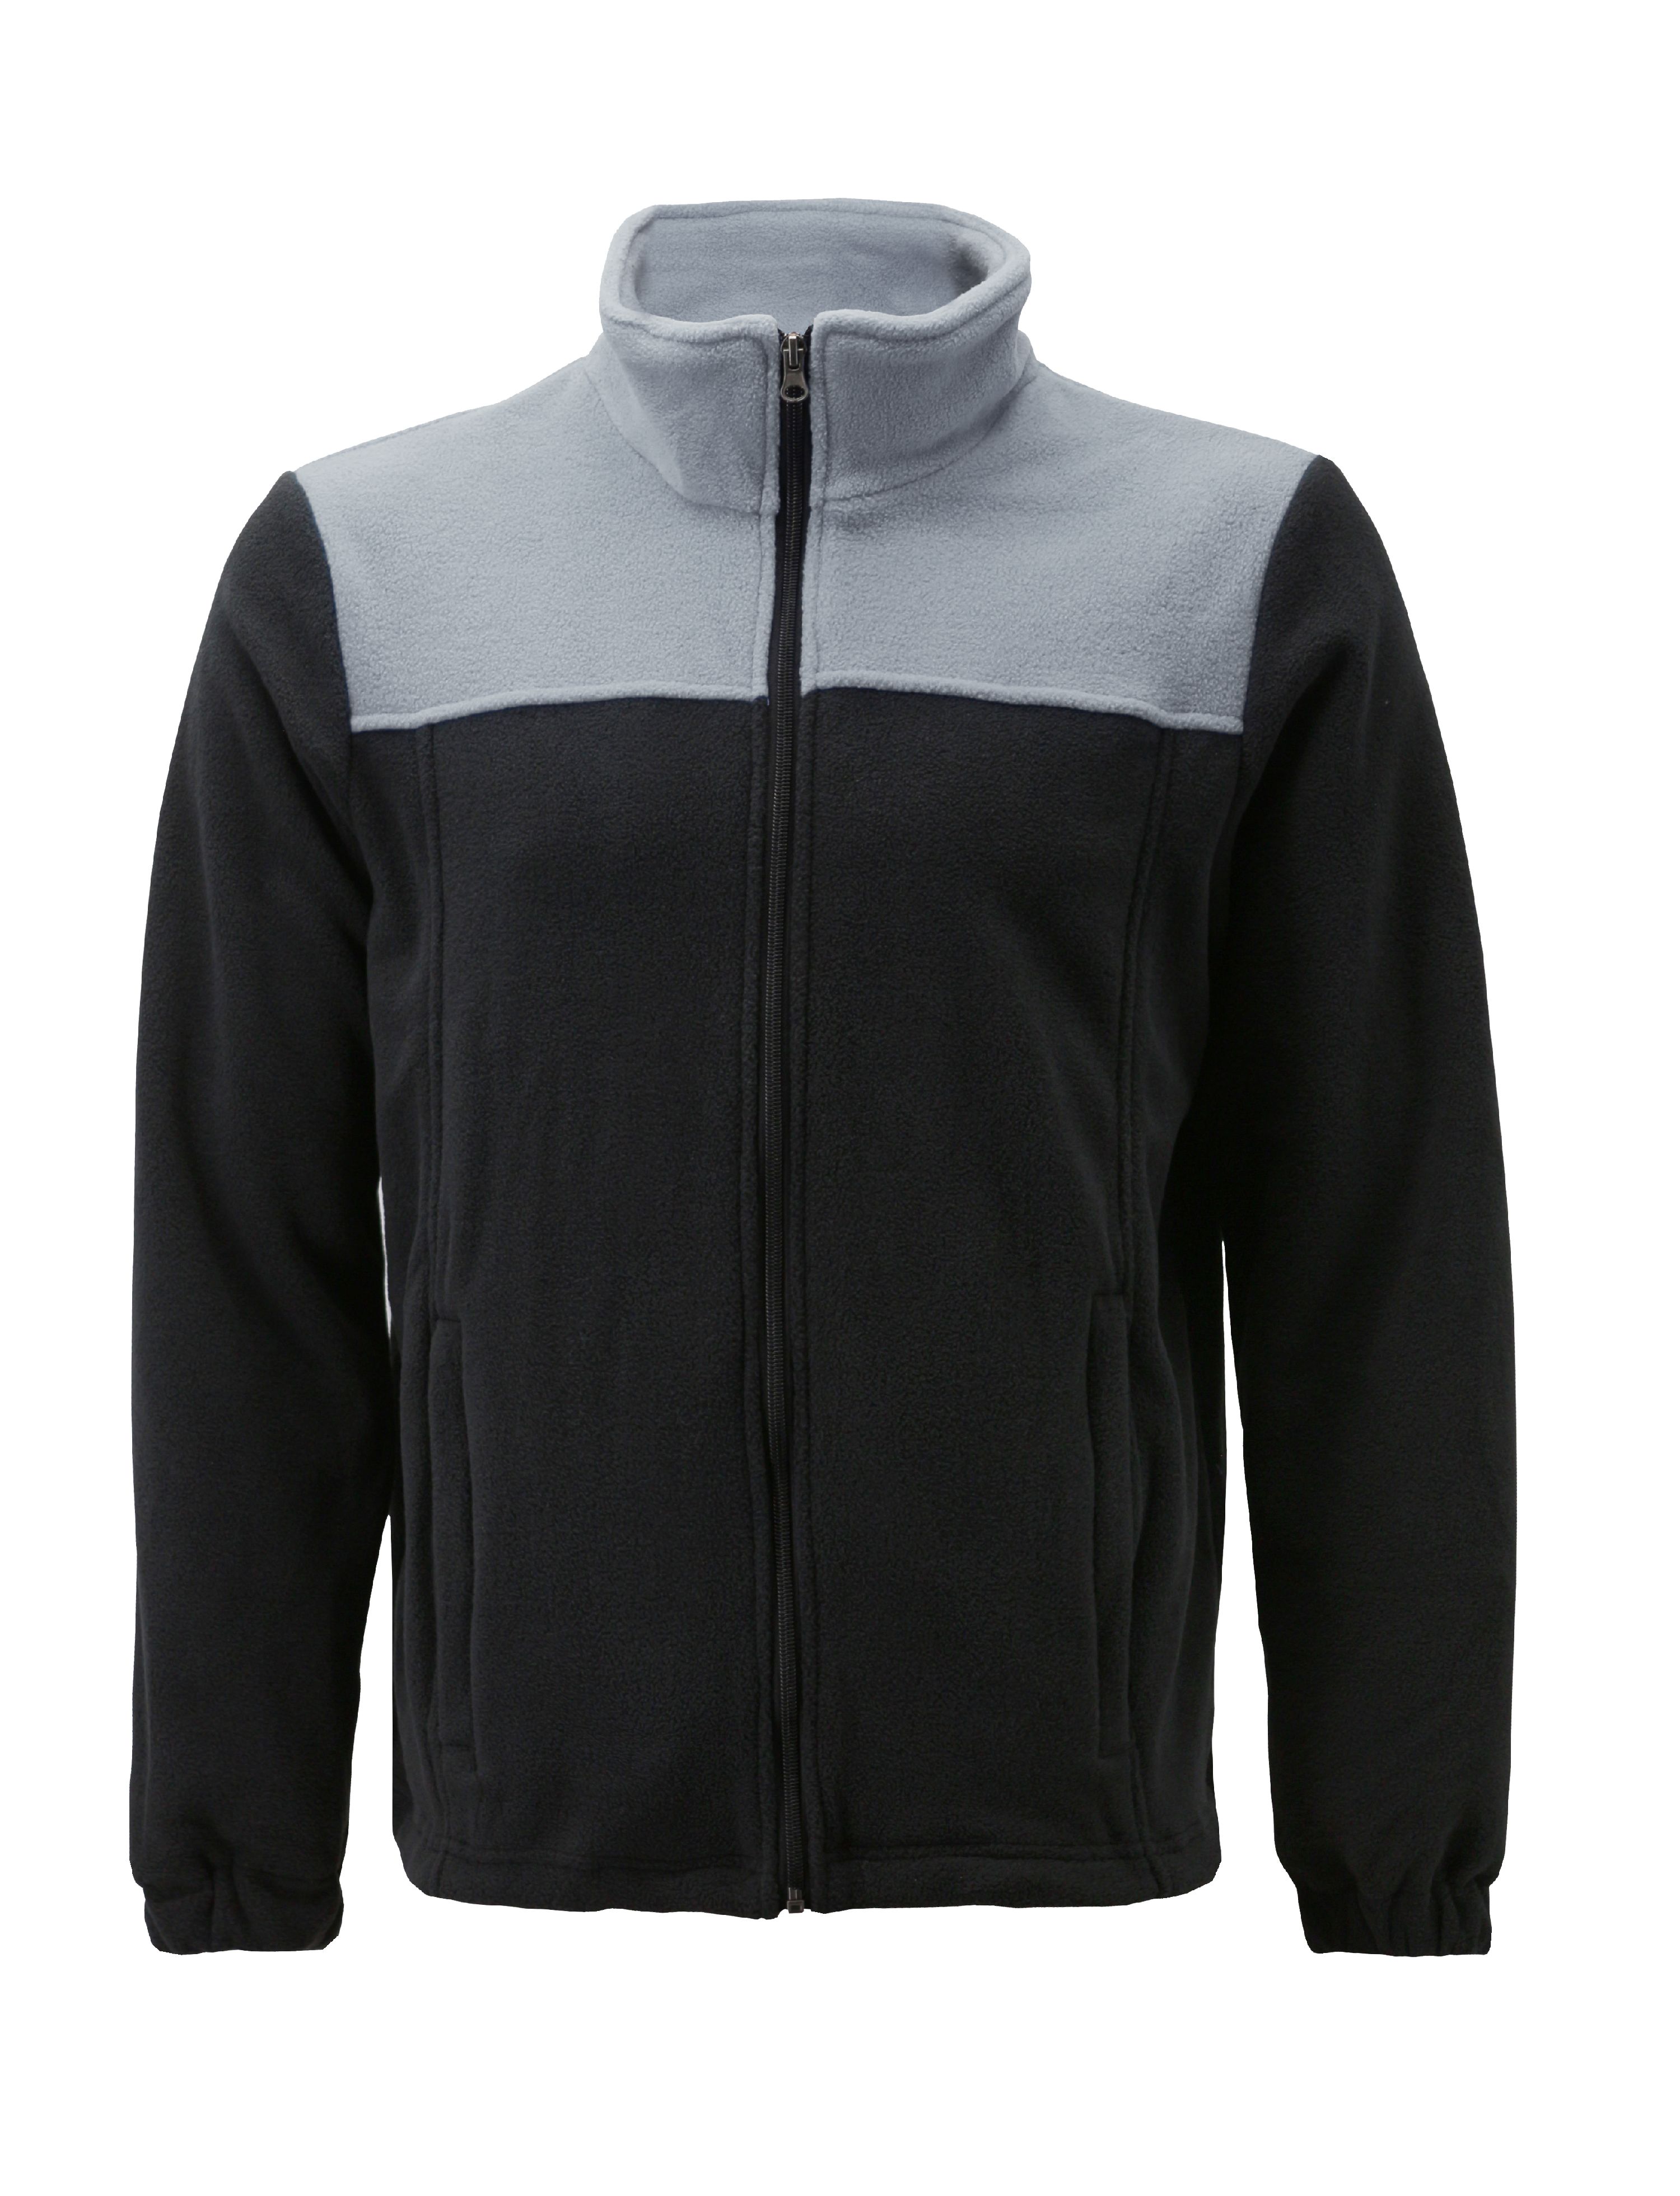 Men's Full Zip-Up Two Tone Solid Warm Polar Fleece Soft Collared Sweater Jacket (L, LF35 #1) - image 1 of 1